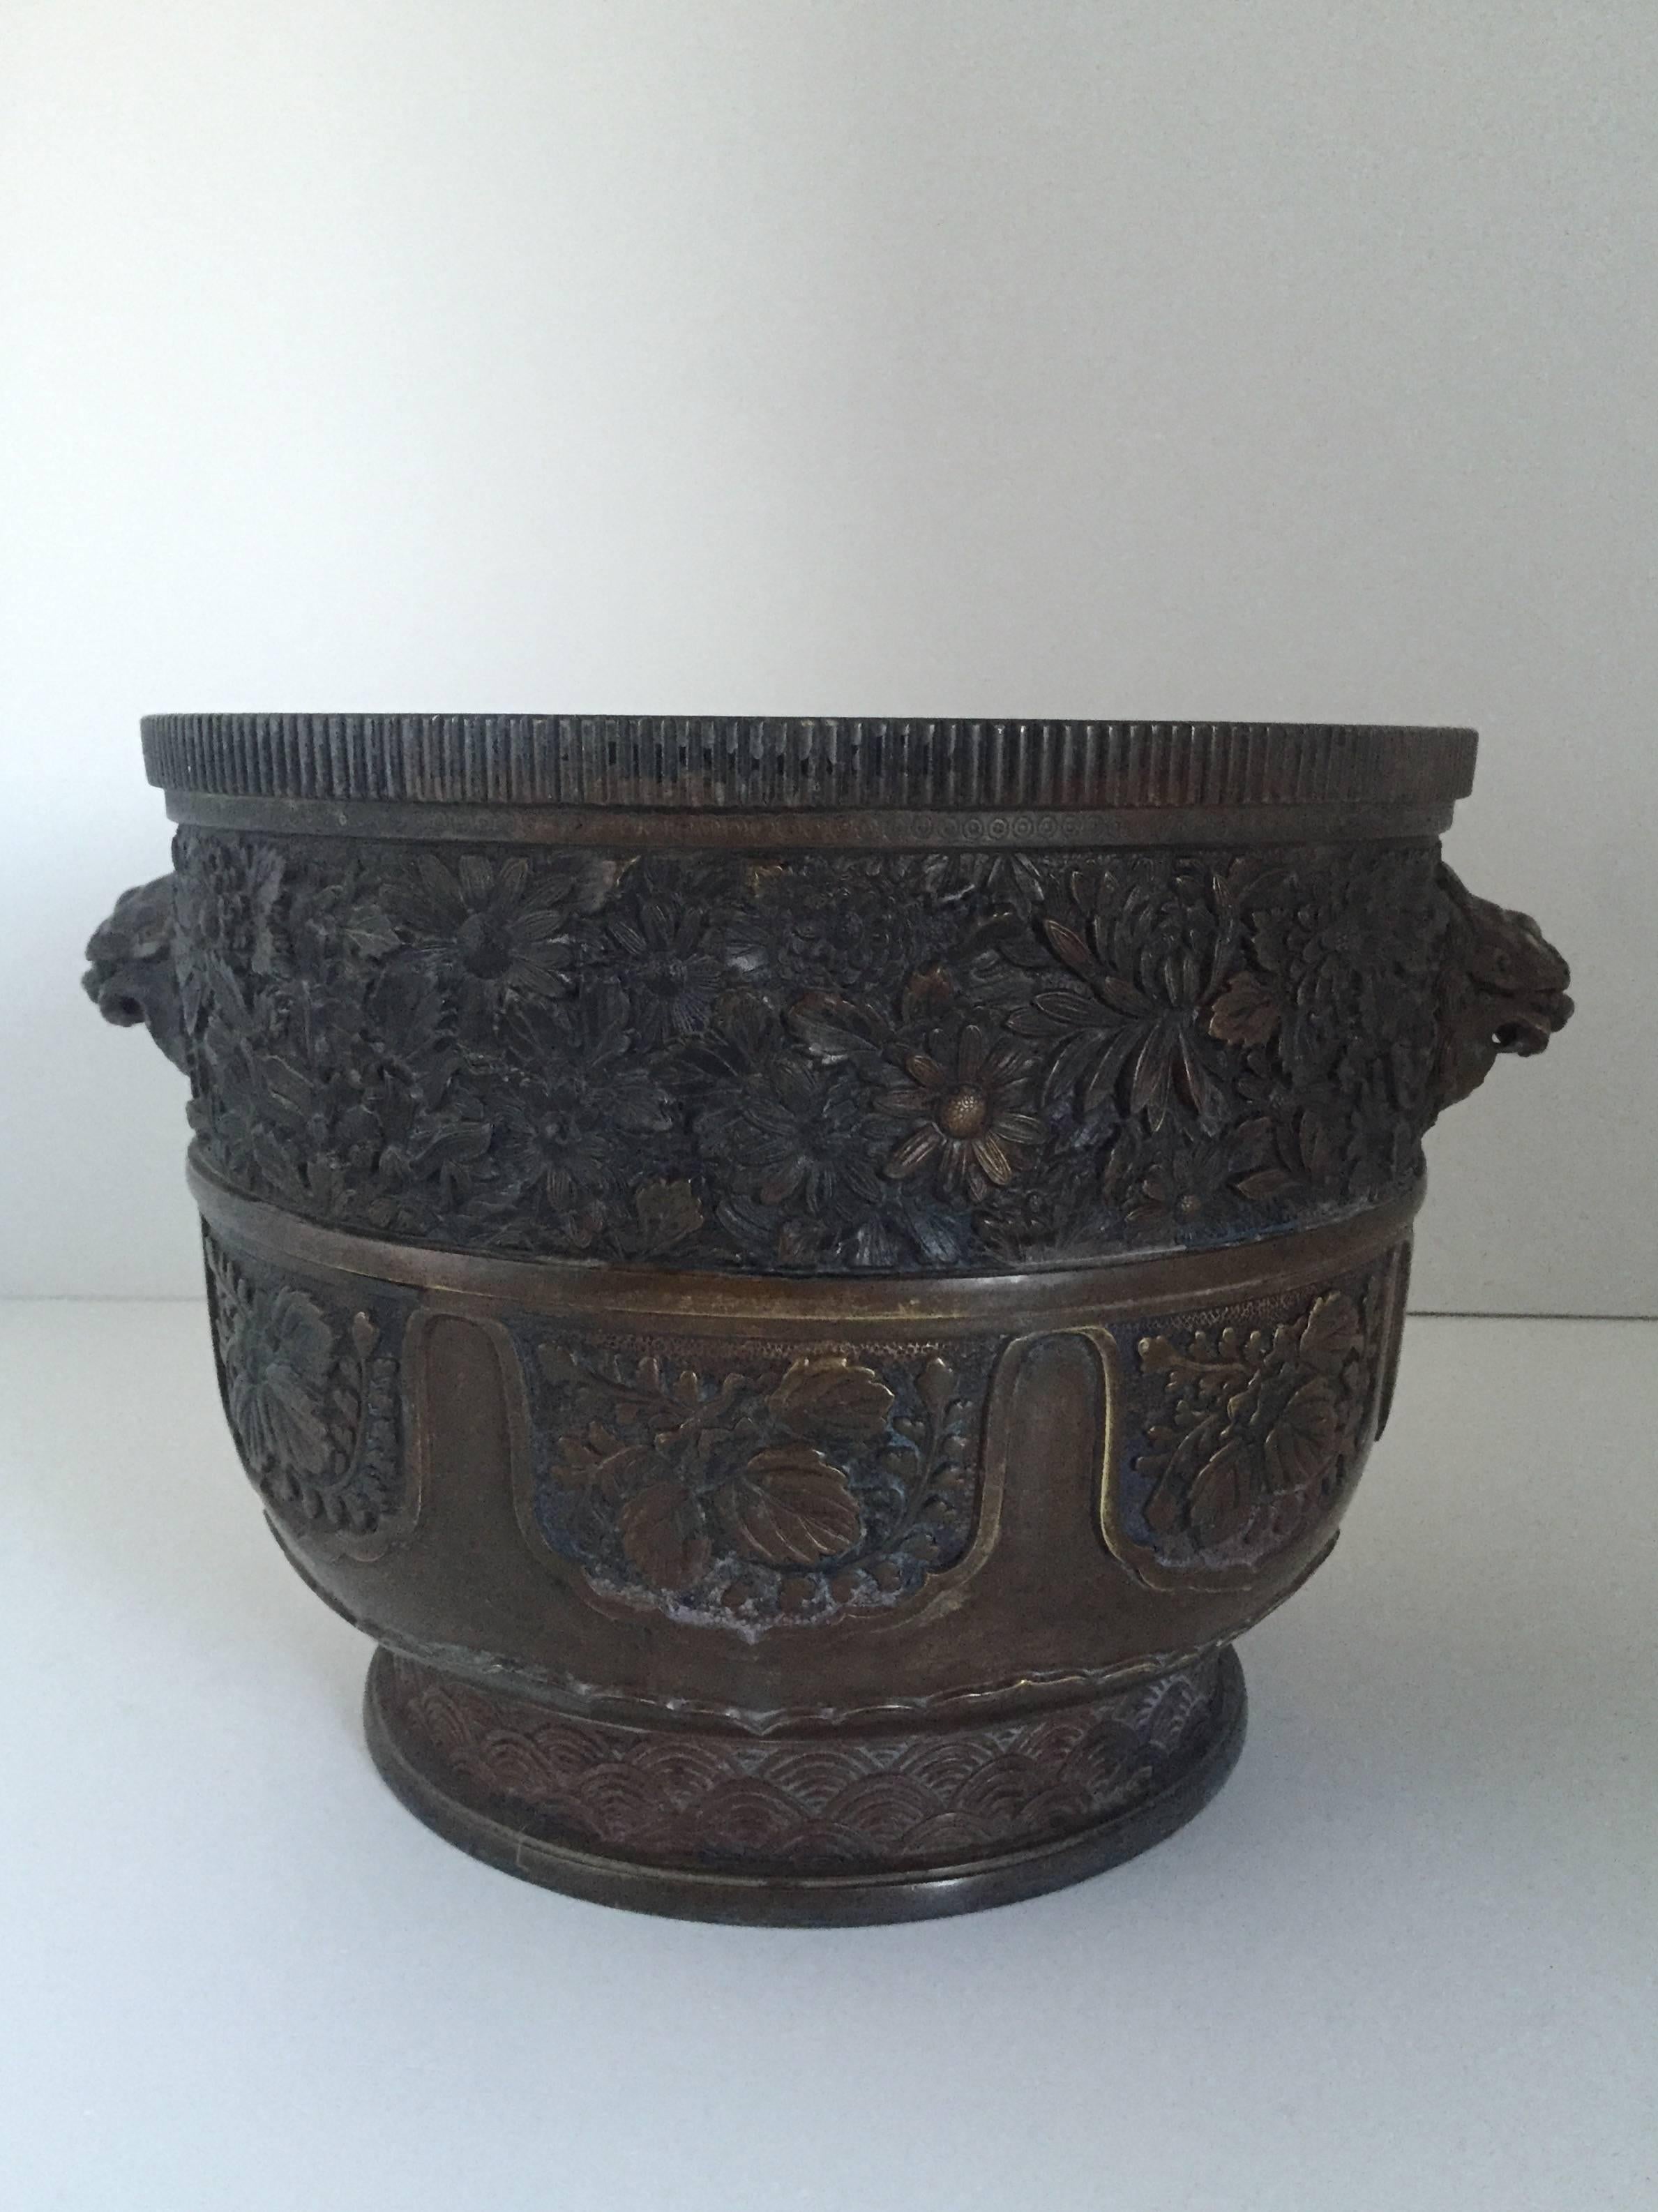 An extremely well cast large Chinese planter or jardinière, 19th century or earlier. There is a mark to the base which we haven't been able to read. The quality of the casting is fantastic and very accurate. The lion mascarons are expressfull and